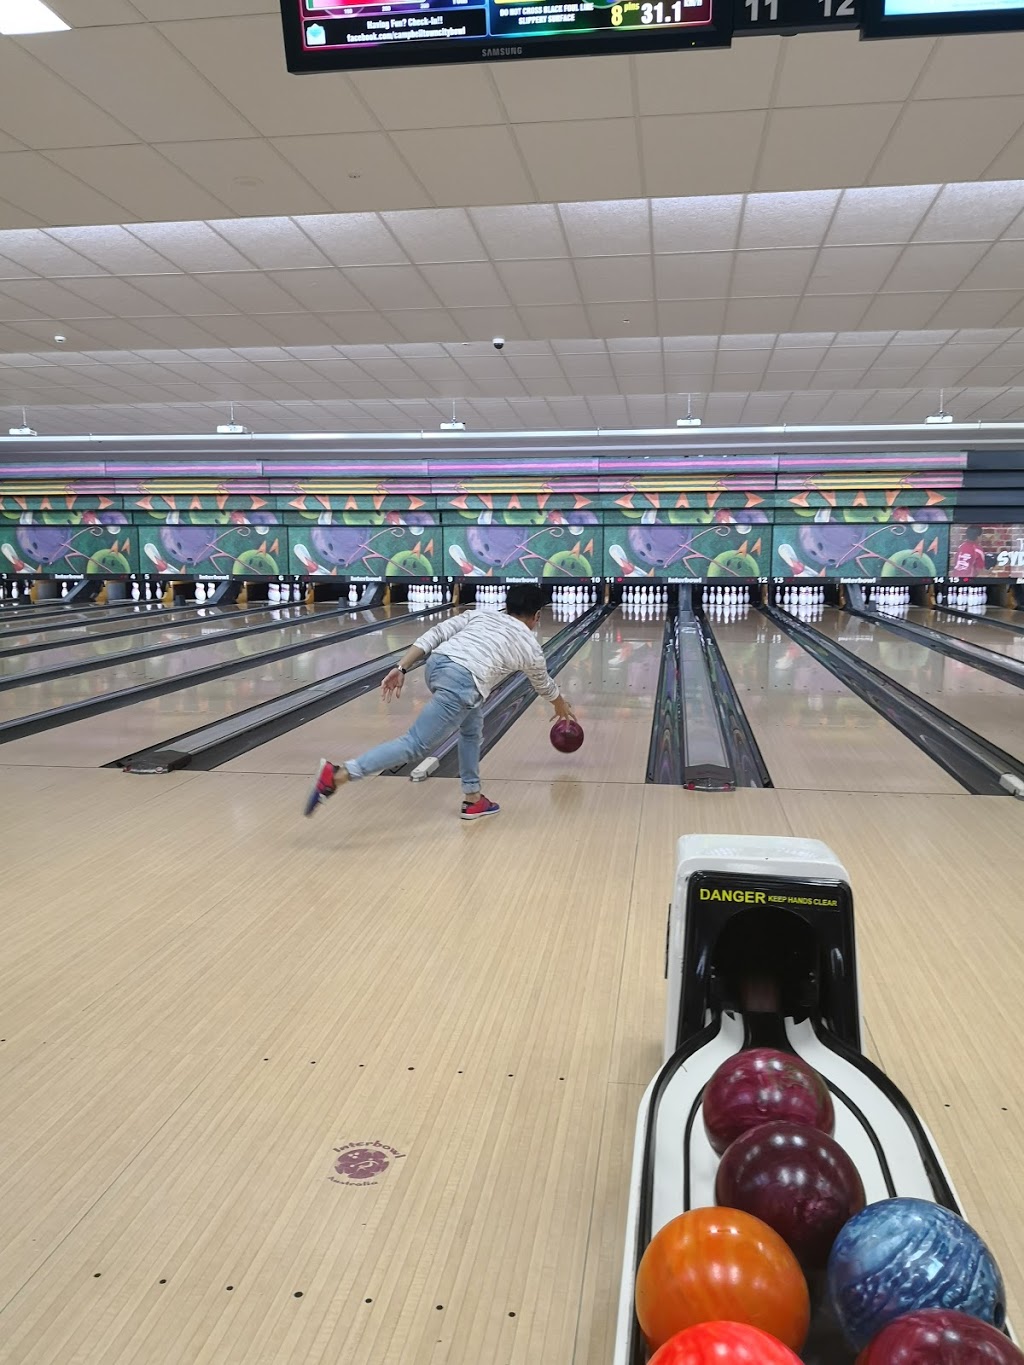 Campbelltown City Bowl | bowling alley | 11 Hollylea Rd, Leumeah NSW 2560, Australia | 0246255222 OR +61 2 4625 5222